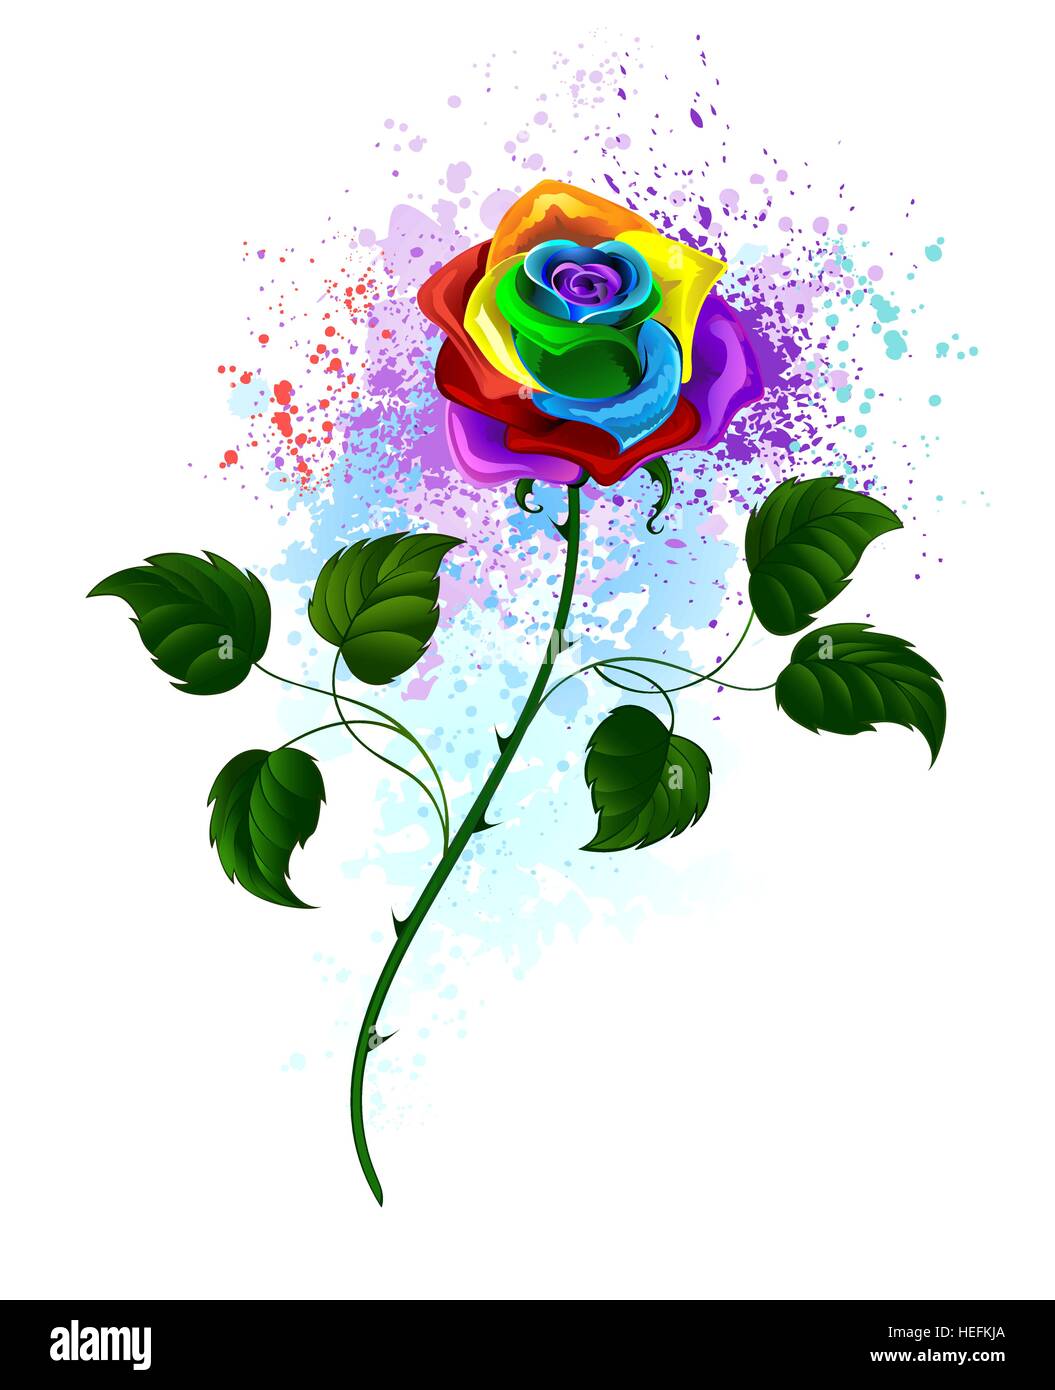 rainbow rose with a curved green stem and green leaves on a white background, shaded bright splashes of paint. Stock Vector